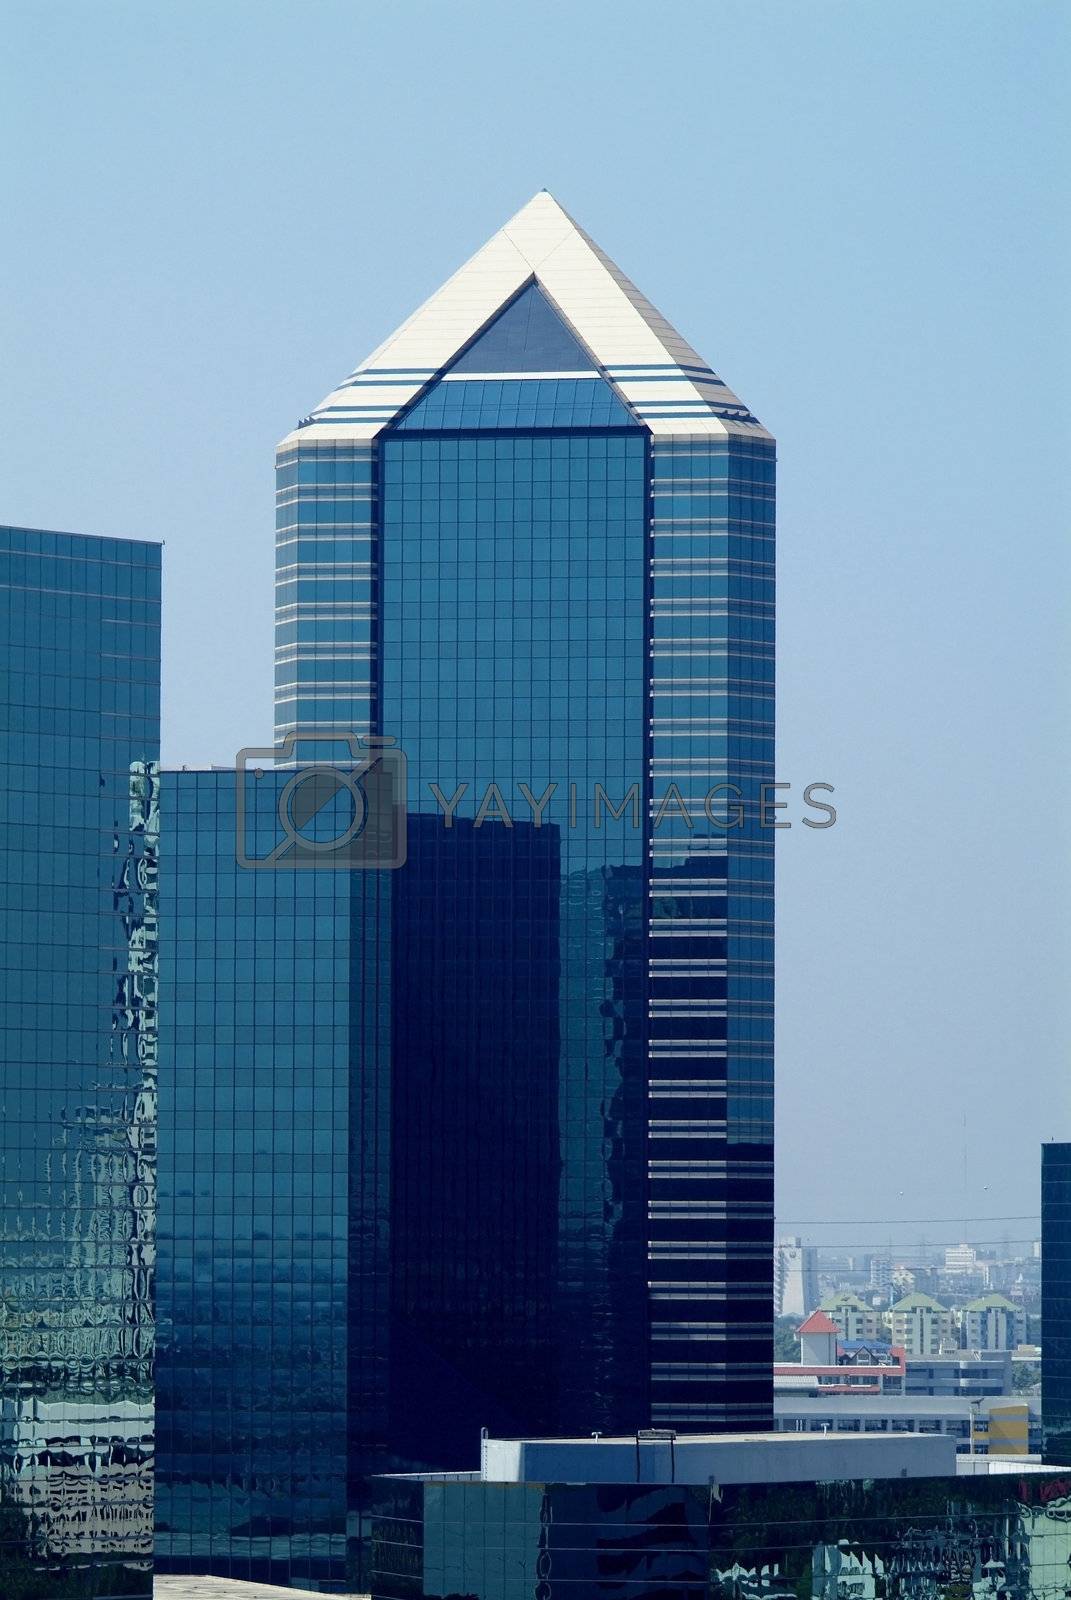 Royalty free image of High-rise office building by epixx